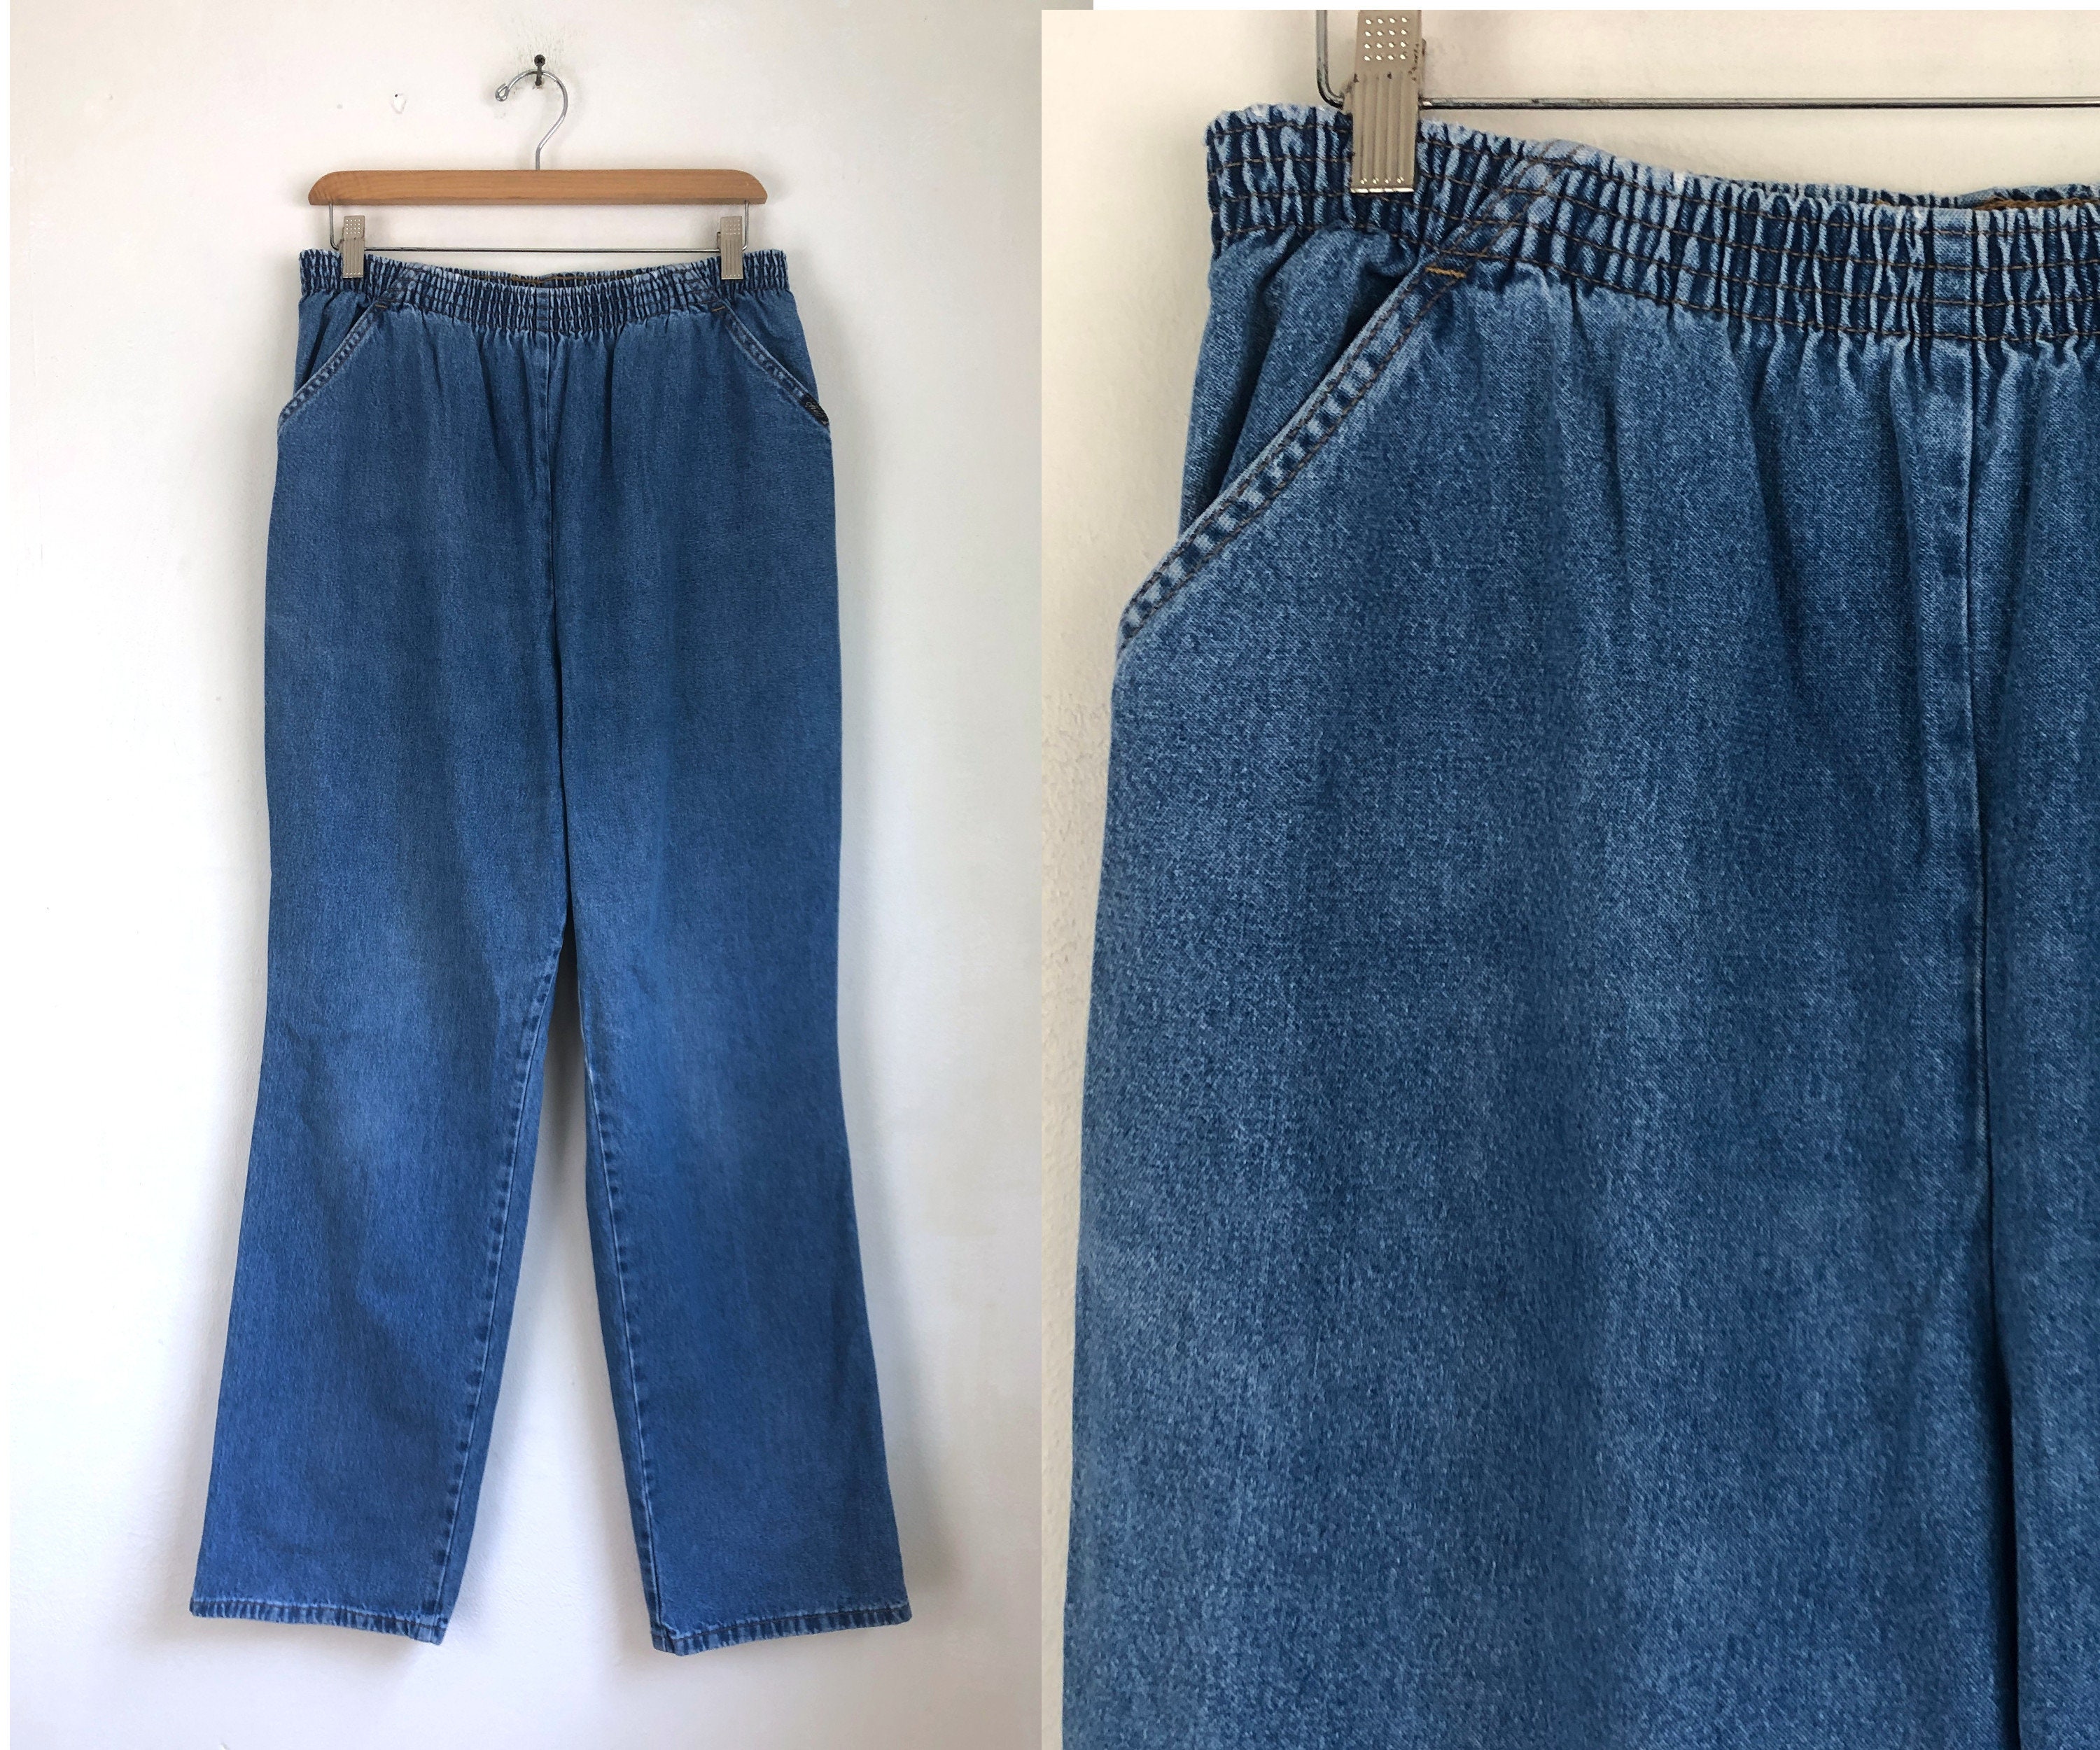 Vintage High Waist Jeans 90s Faded Denim Blue Jeans with | Etsy